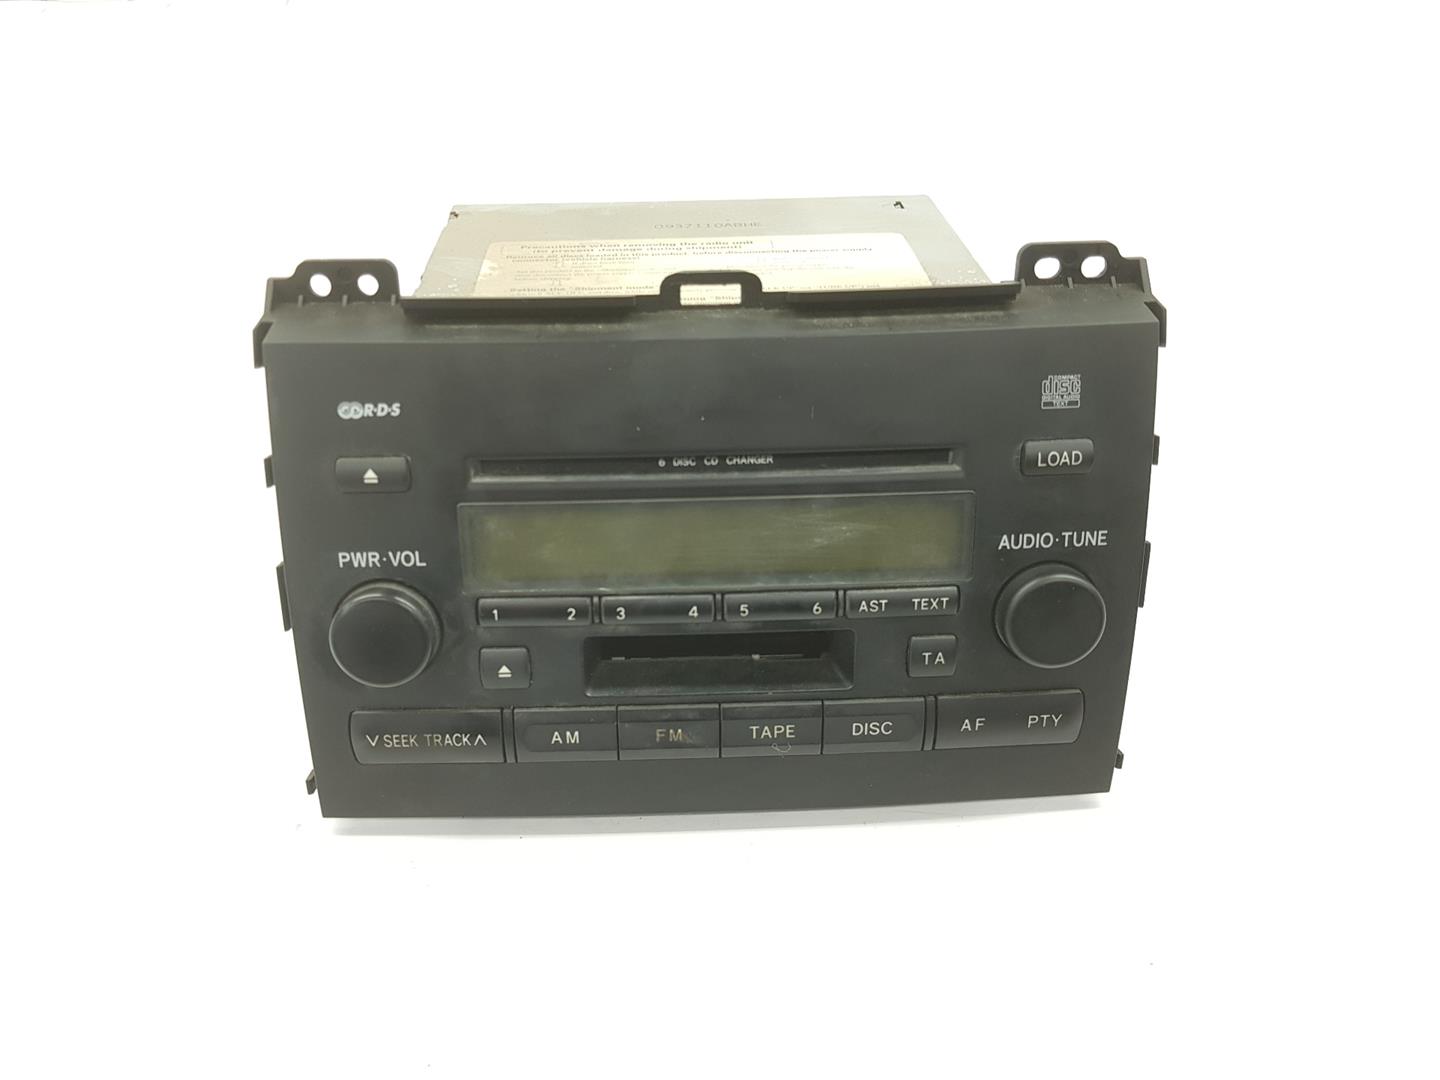 TOYOTA Land Cruiser 70 Series (1984-2024) Music Player Without GPS 8612060510, 8612060510 24884708